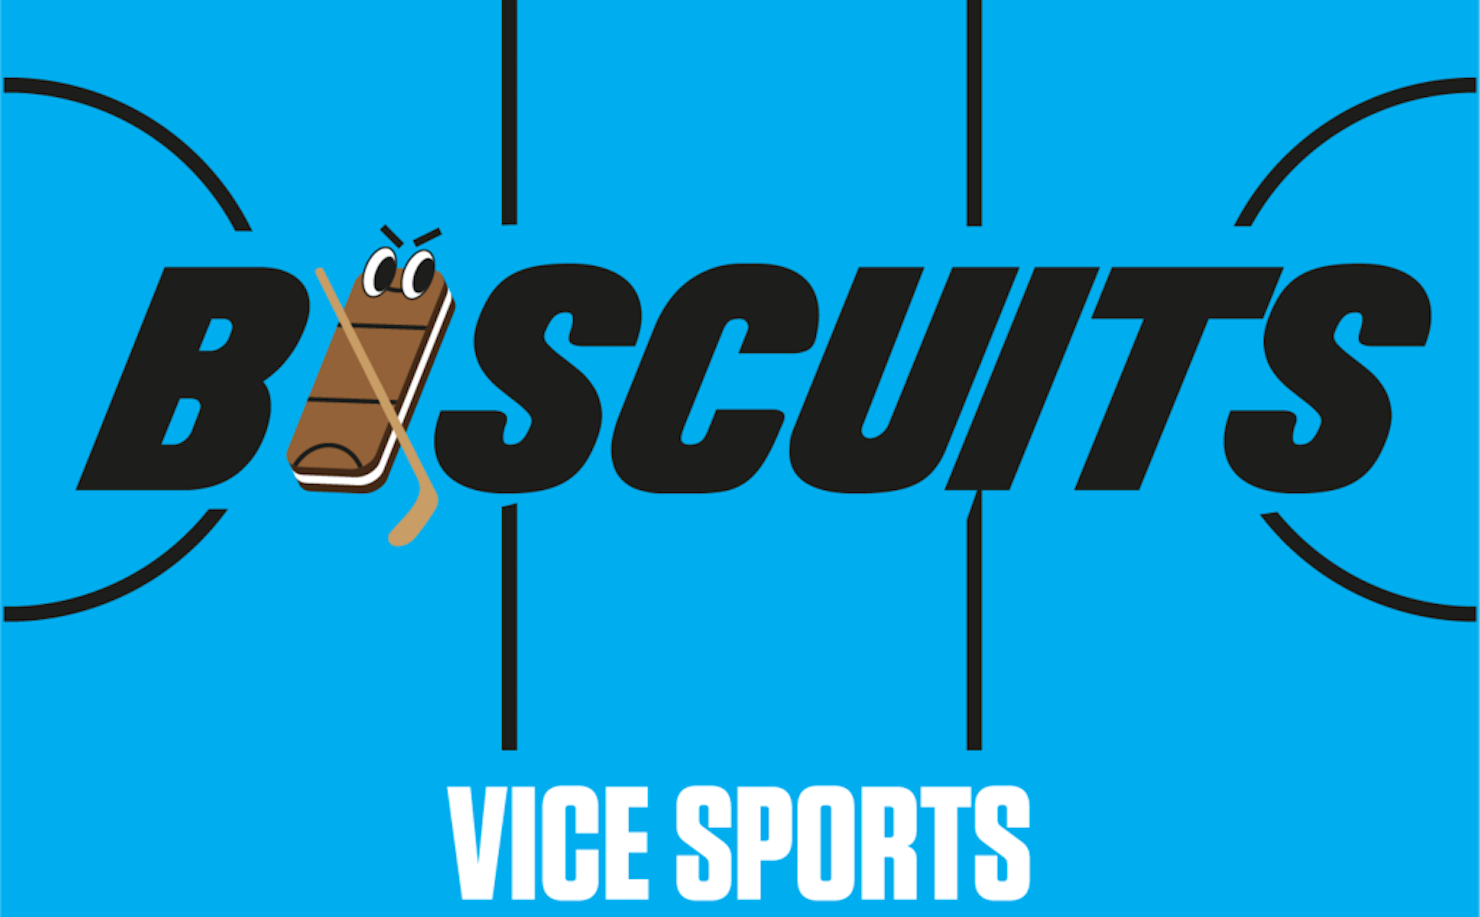 Biscuits Vice Sports